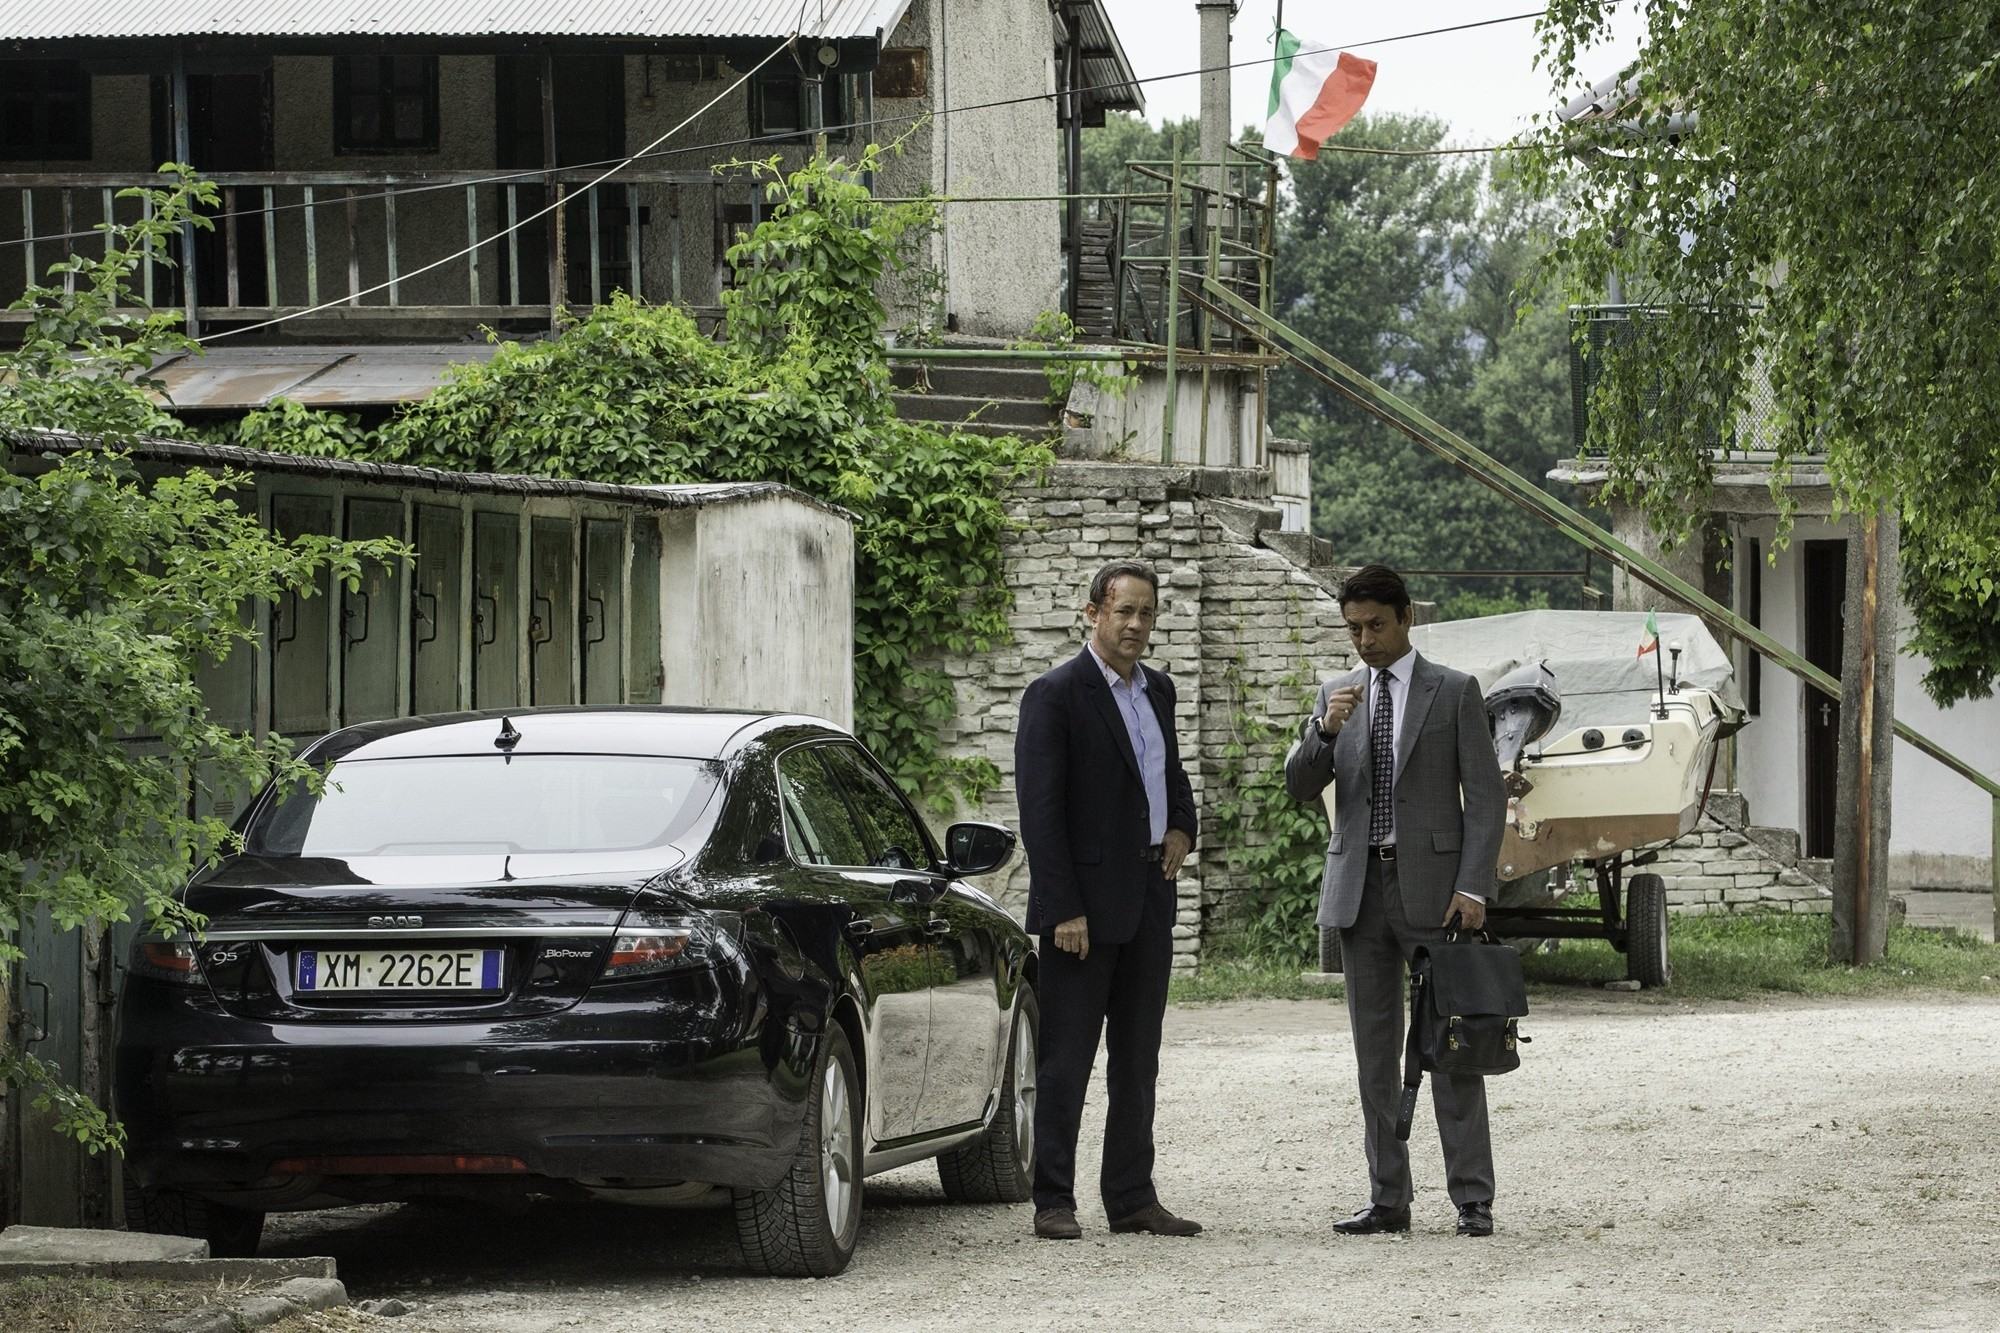 Tom Hanks stars as Robert Langdon and Irrfan Khan stars as Harry Sims 'The Provost' in Columbia Pictures' Inferno (2016)